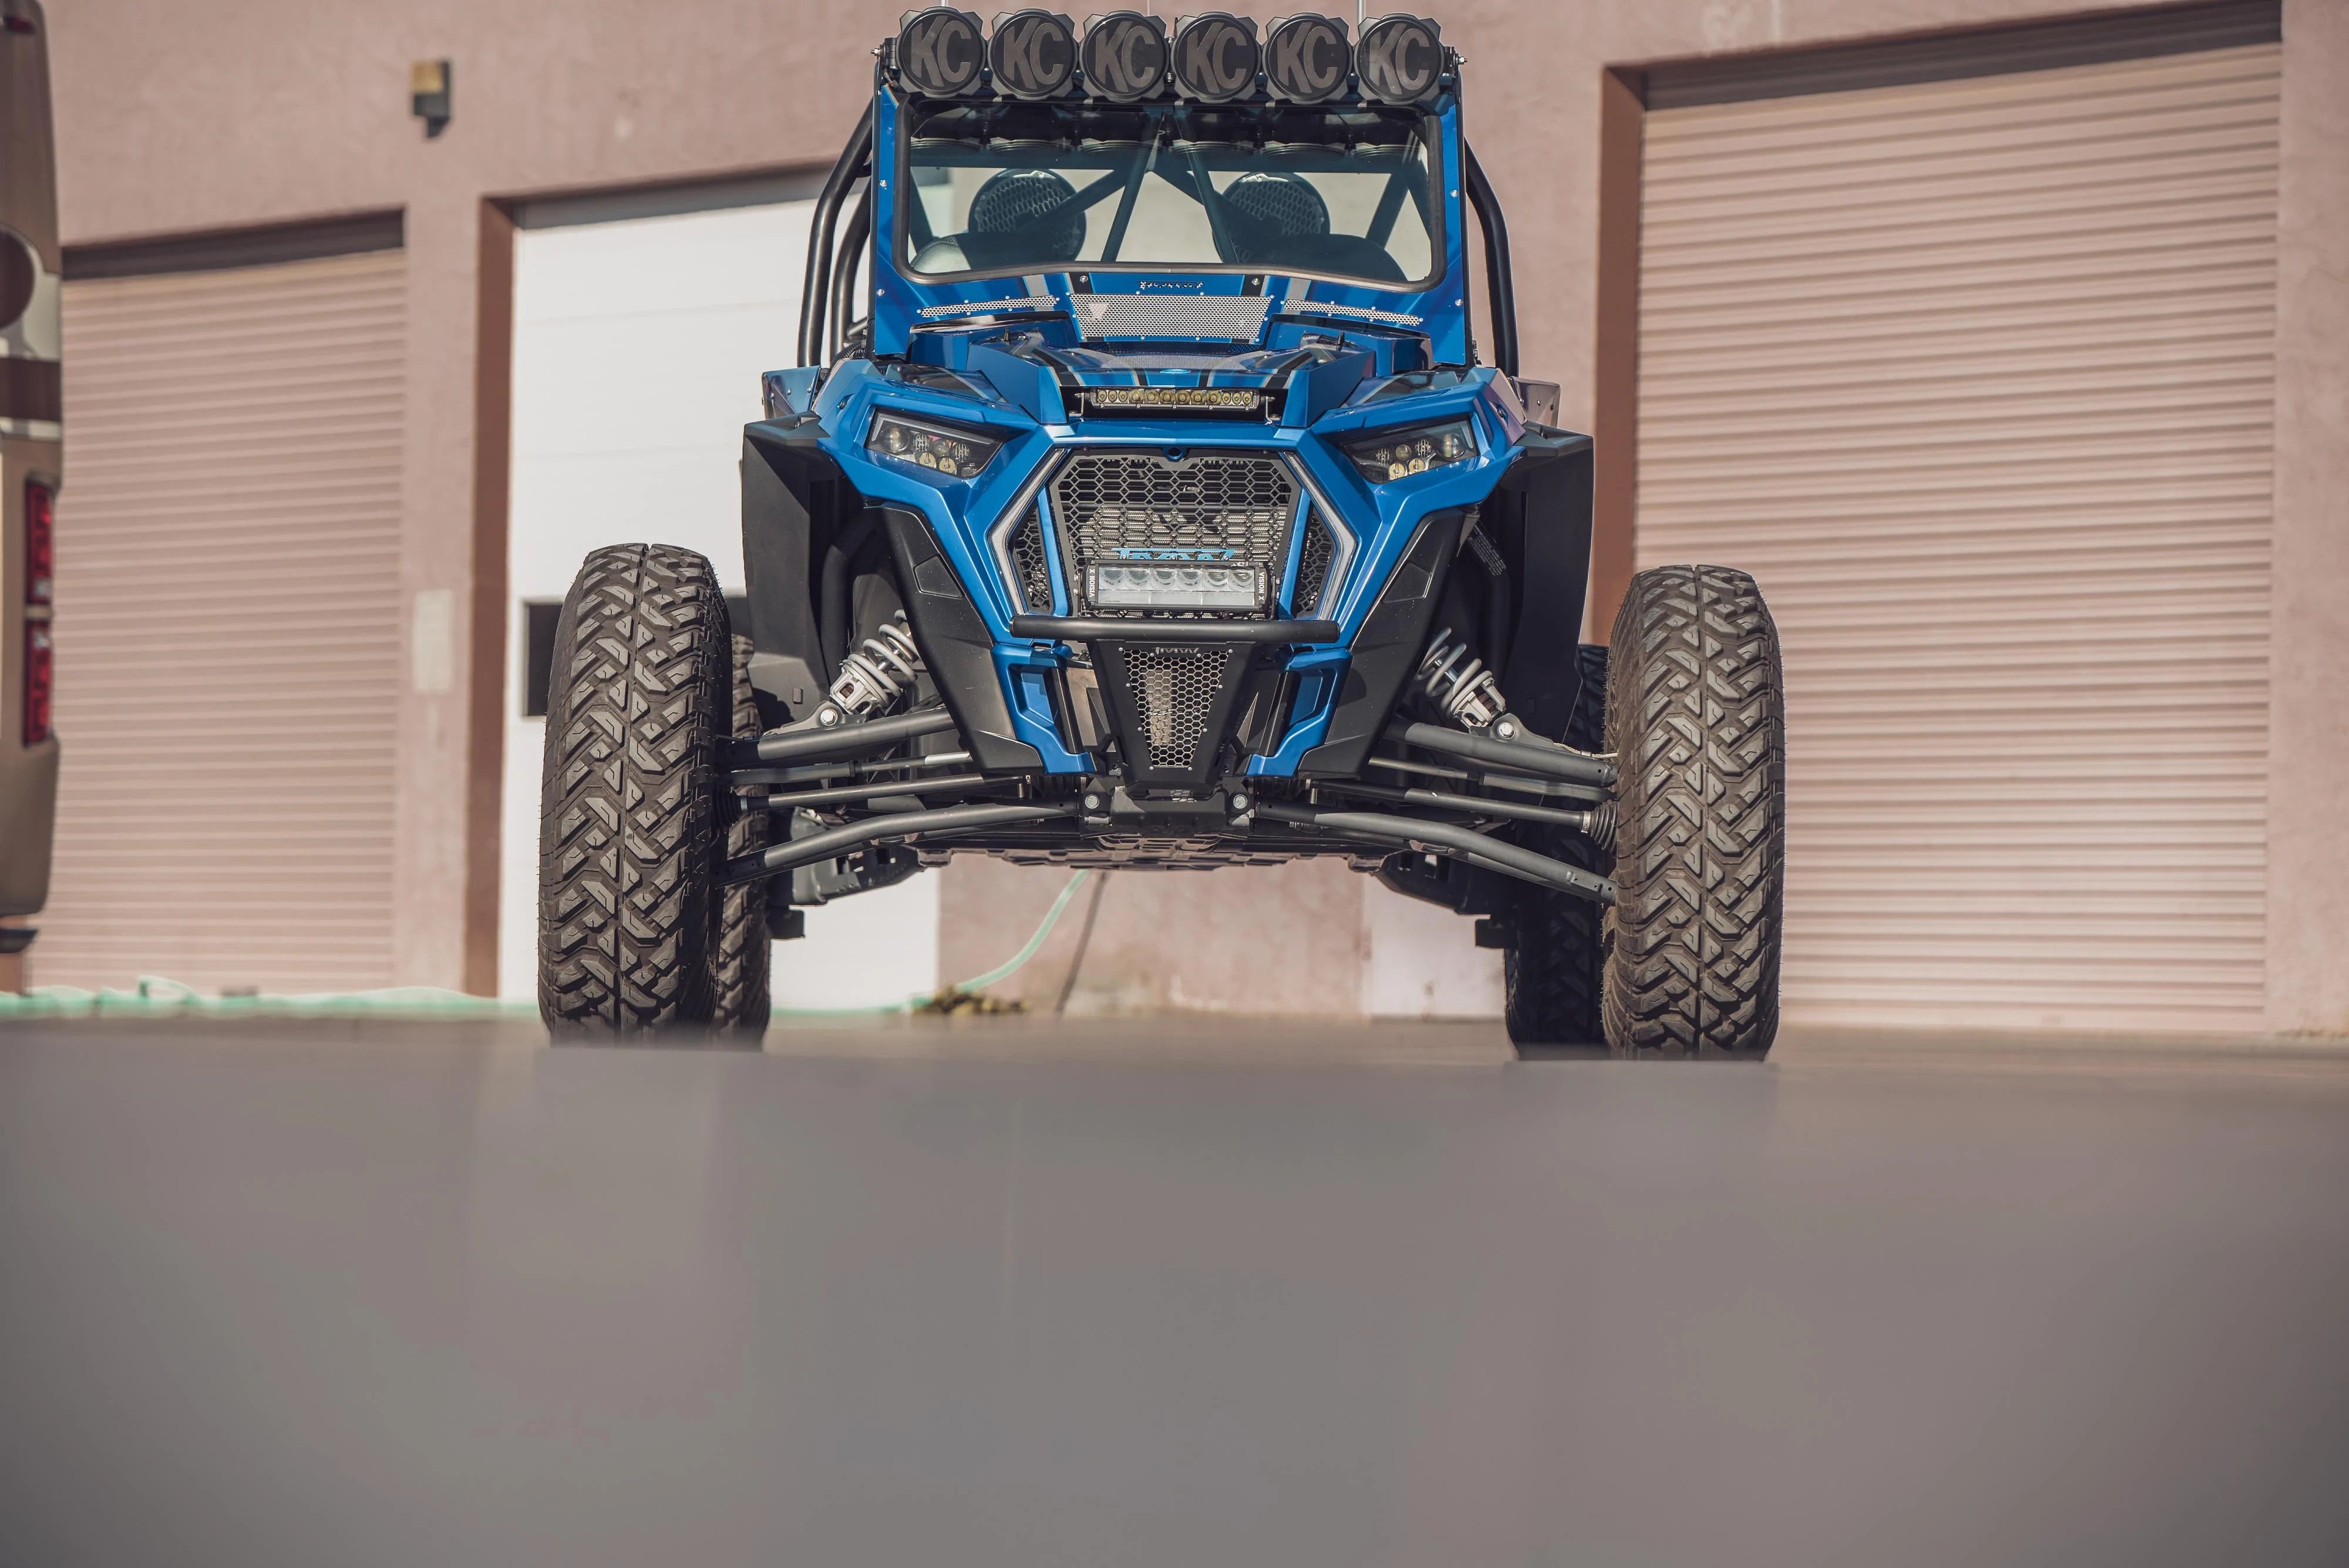 TMW Sand Slayer 4 seat speed cage (fits 2018 Turbo S and 2019+ RZR models) - G Life UTV Shop Parts